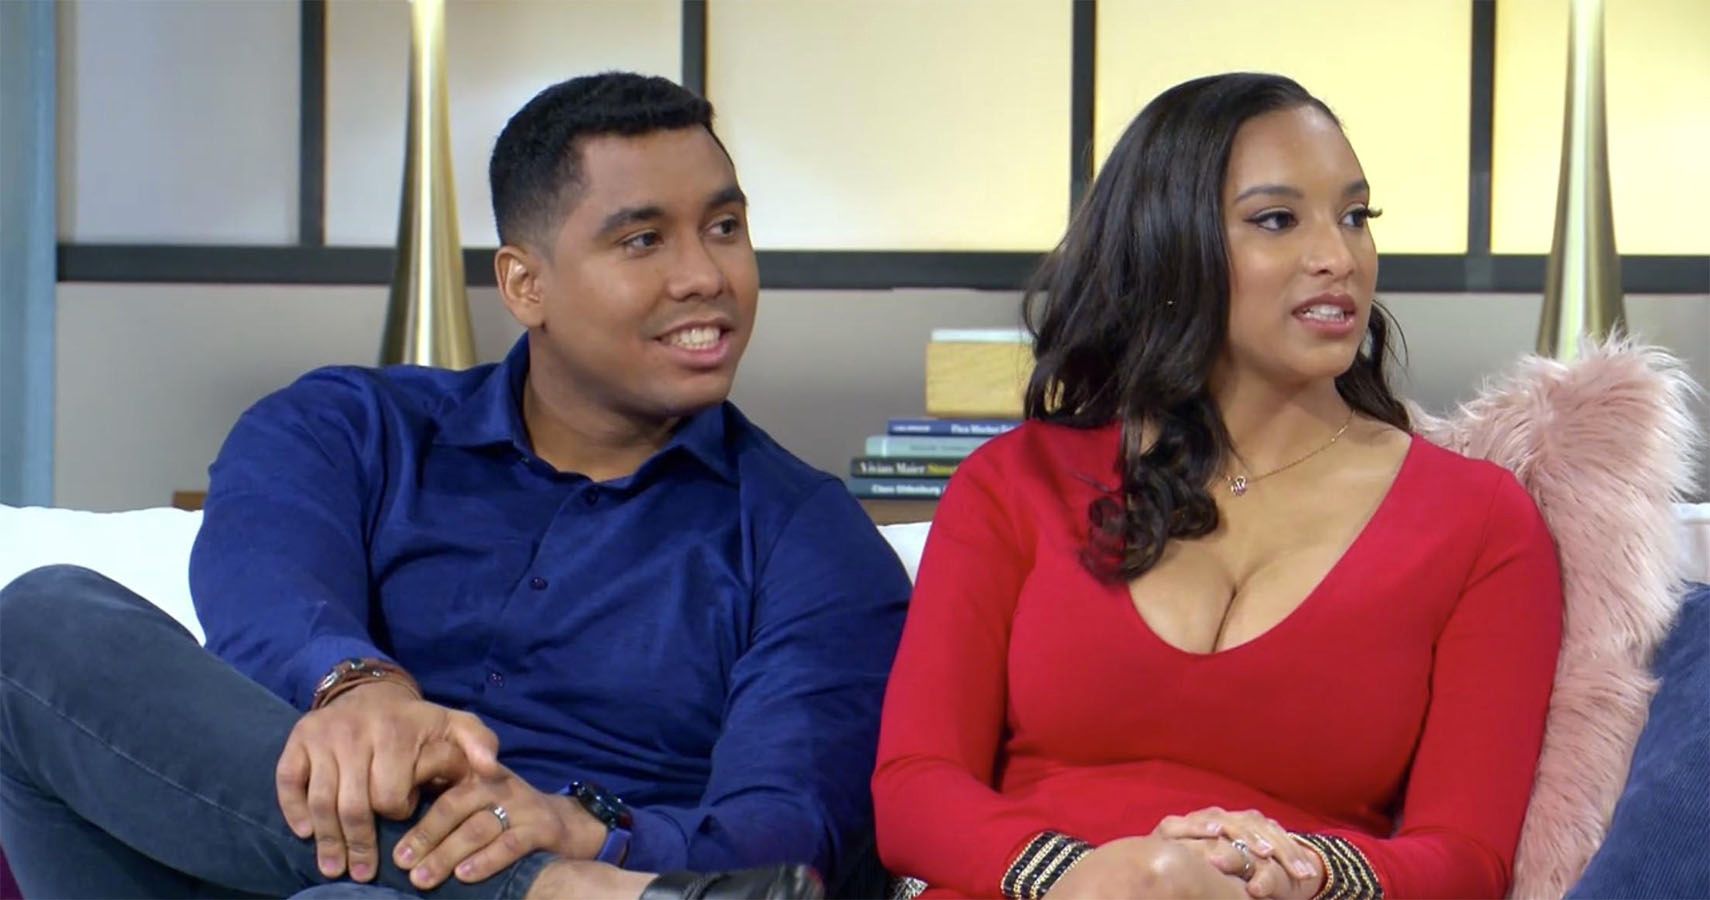 Pedro and Chantel 10 Facts About The 90 Day Fiancé Couple